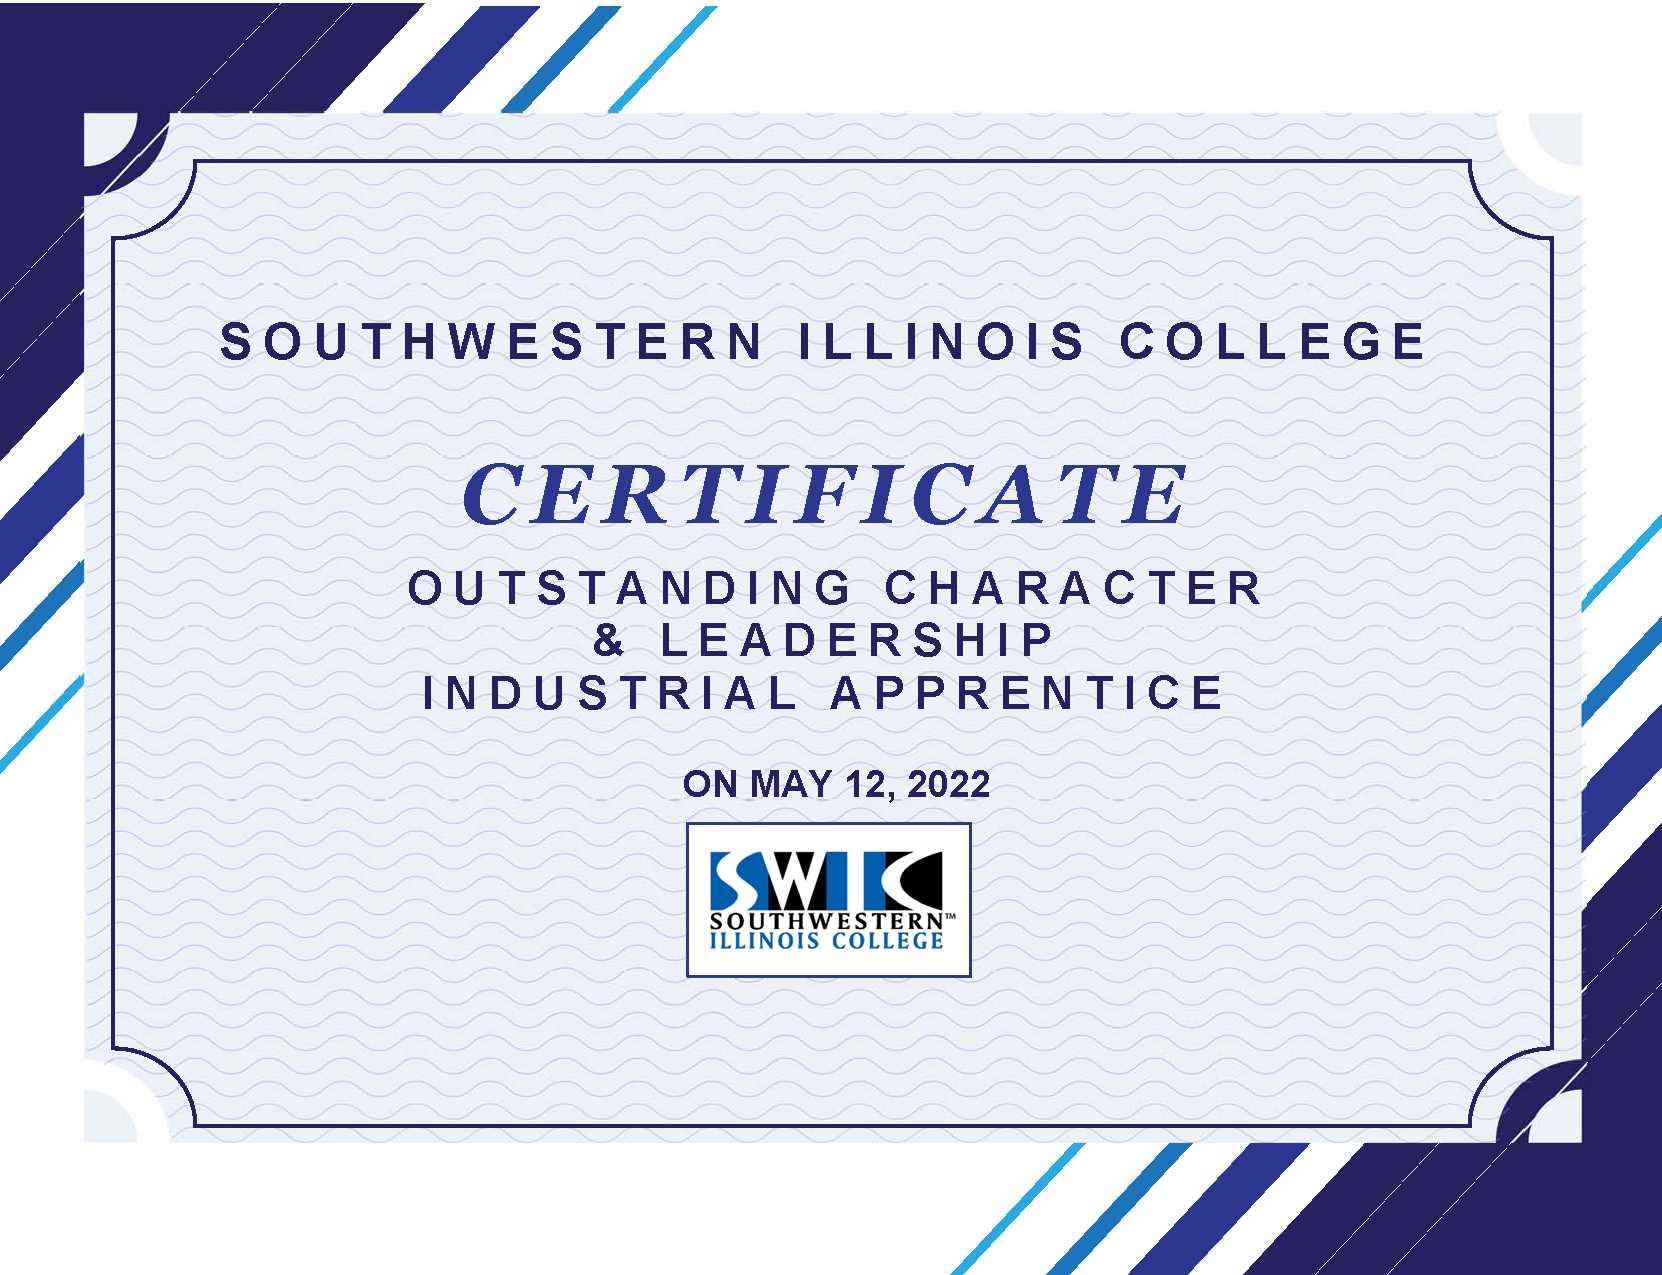 Southwestern Illinois College Certificate Outstanding Character & Leadership Industrial Apprentice